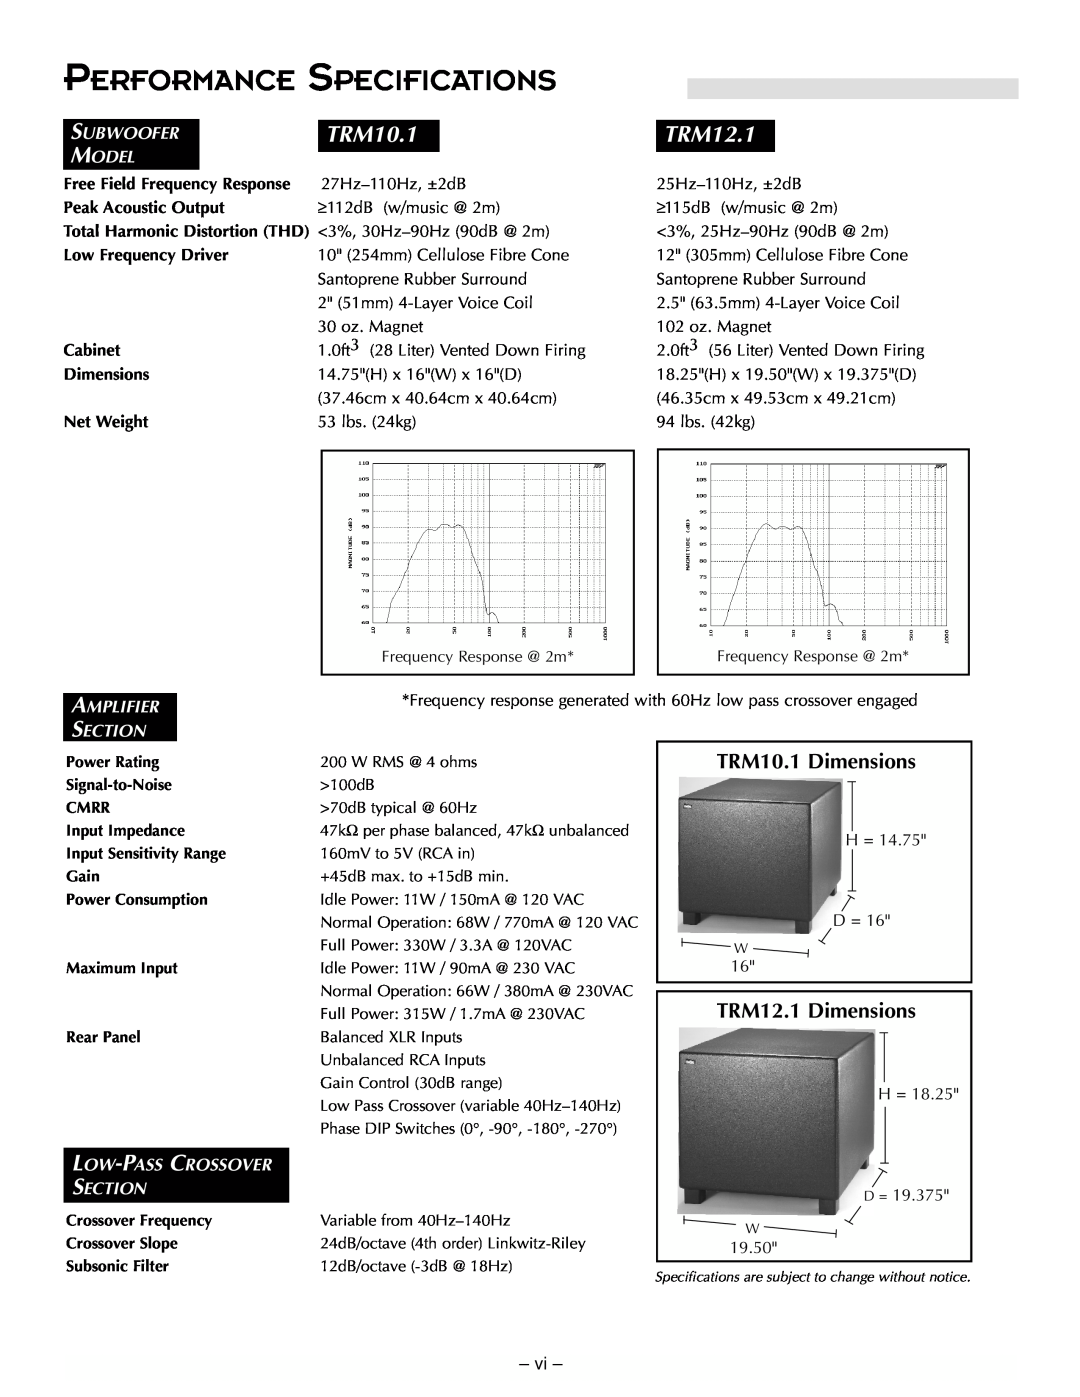 Hafler manual Performance Specifications, TRM10.1 Dimensions, TRM12.1 Dimensions, Subwoofer, Model, Peak Acoustic Output 